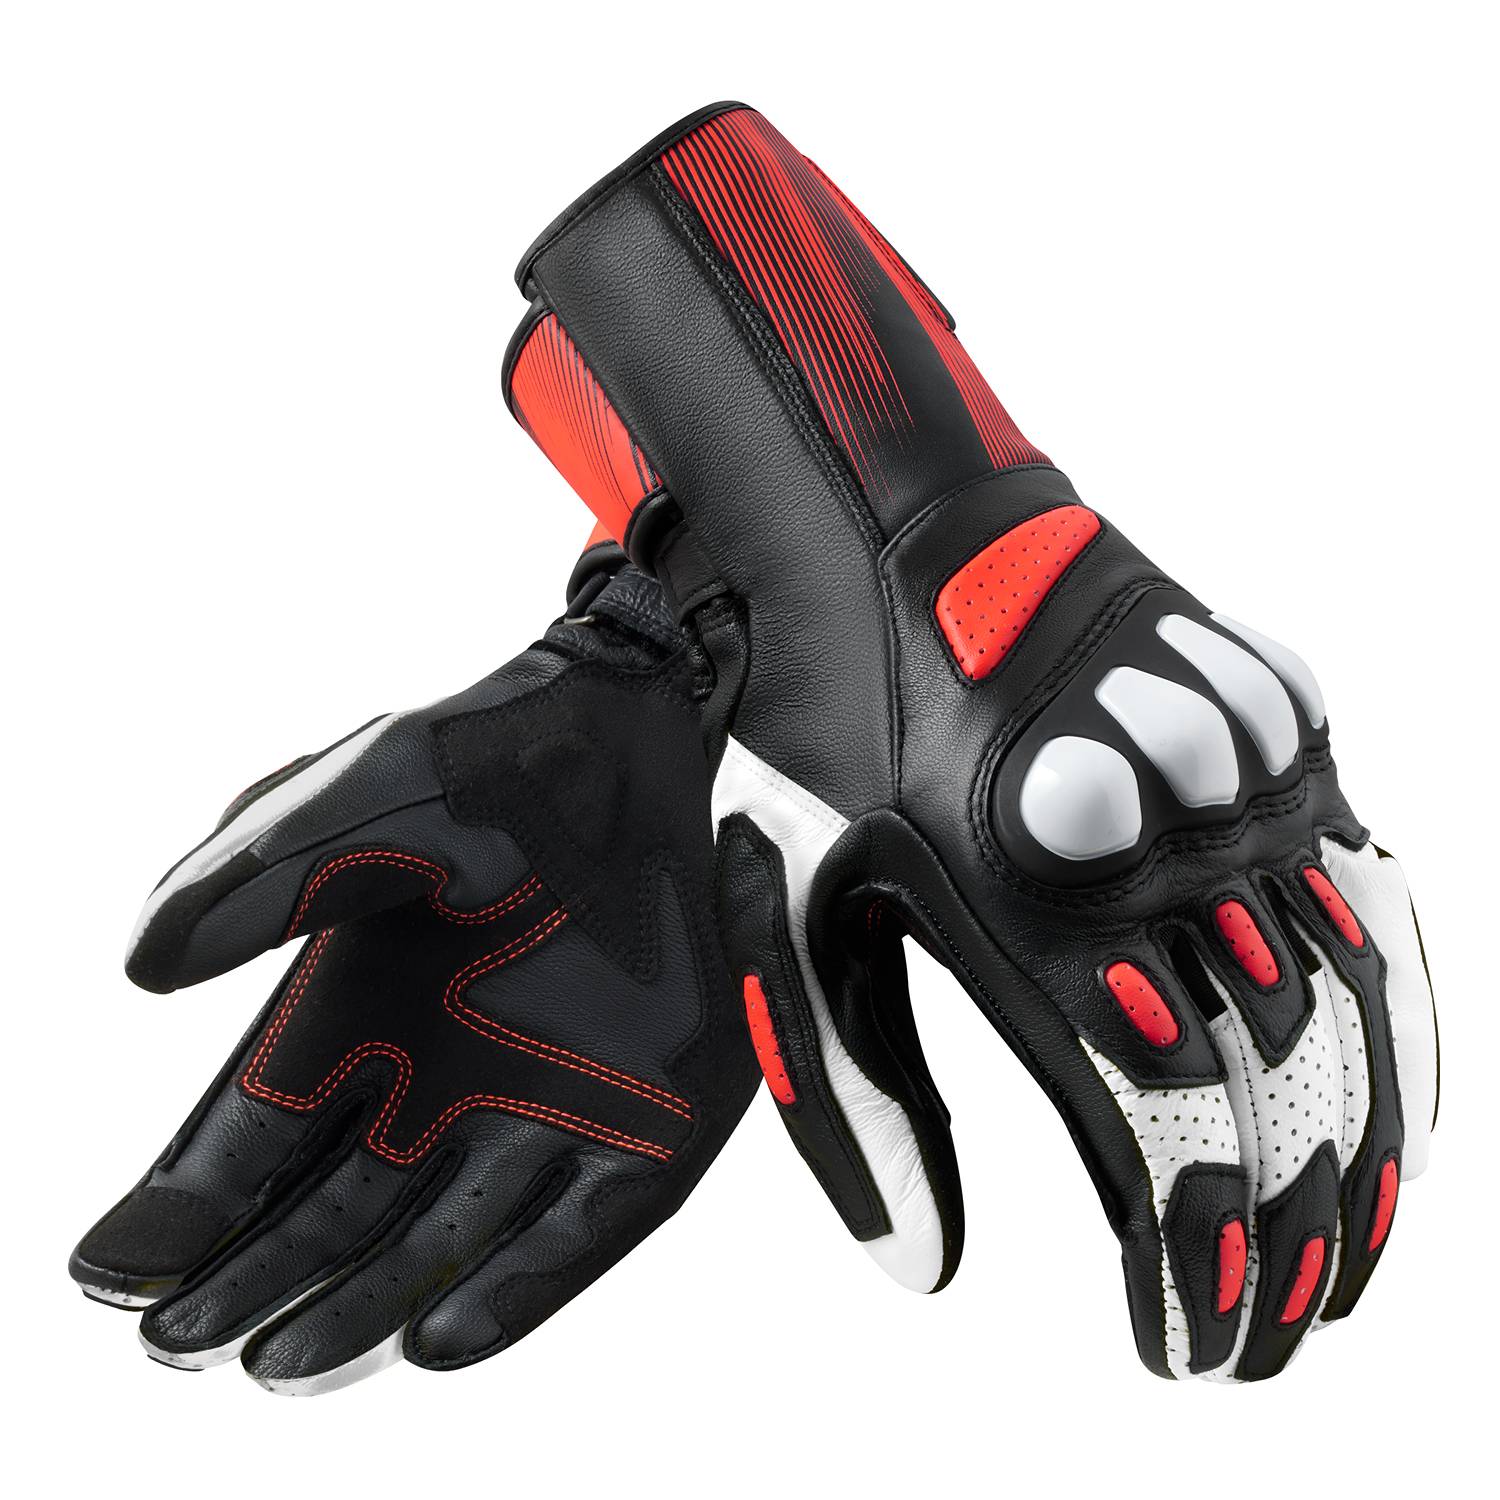 Image of REV'IT! Metis 2 Gloves Black Neon Red Size XL ID 8700001360456